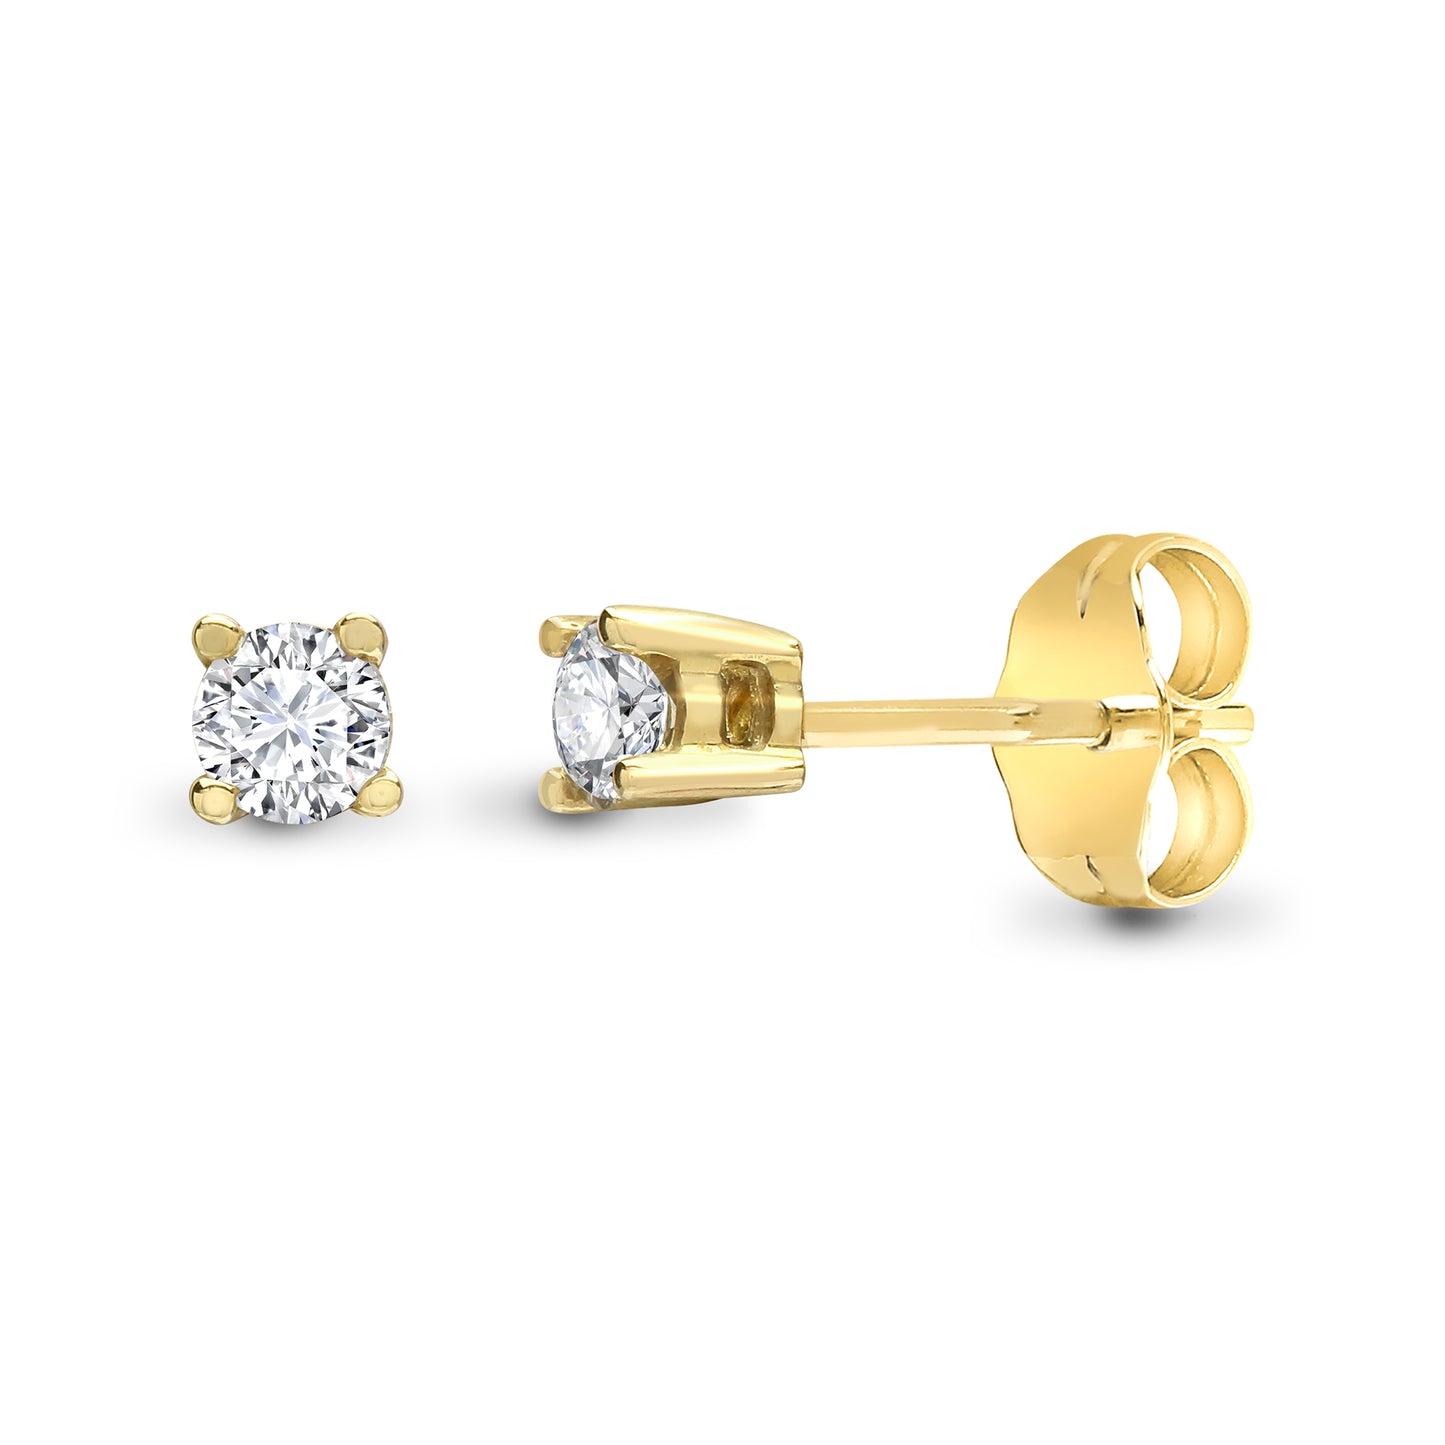 9ct Gold  0.3ct Diamond Solitaire Stud Earrings - 9E092-030